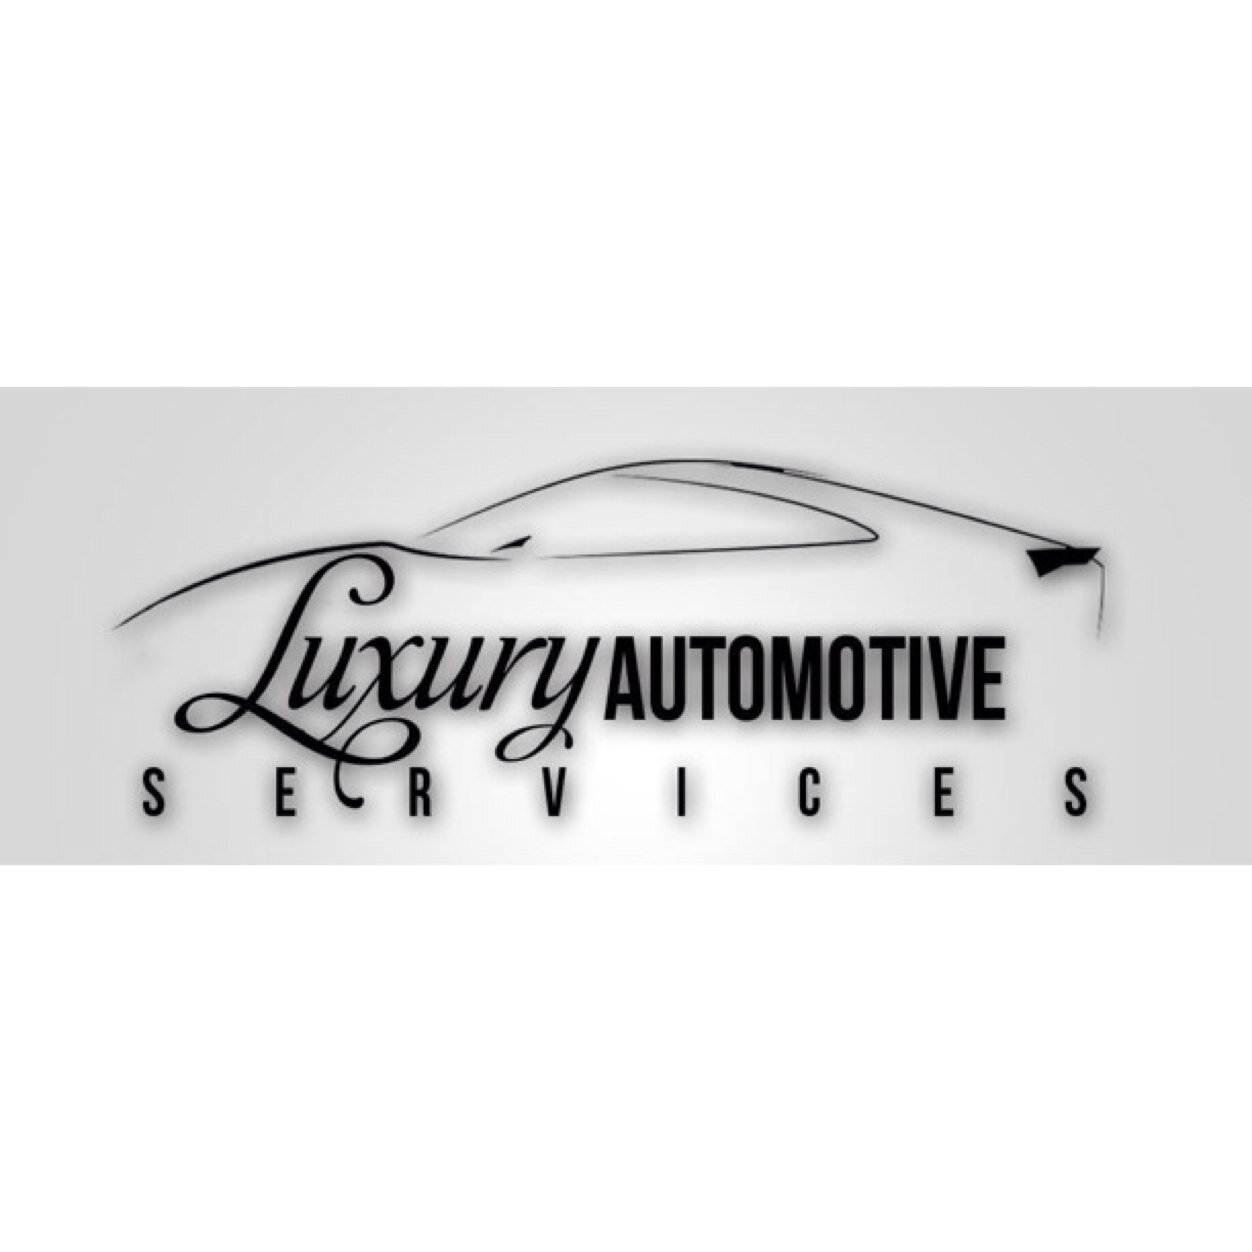 Luxury Automotive Services is your #1 source for everything car related ! Wheels & tires, window tinting, detailing, Remote Starts, 3M clear Bra!